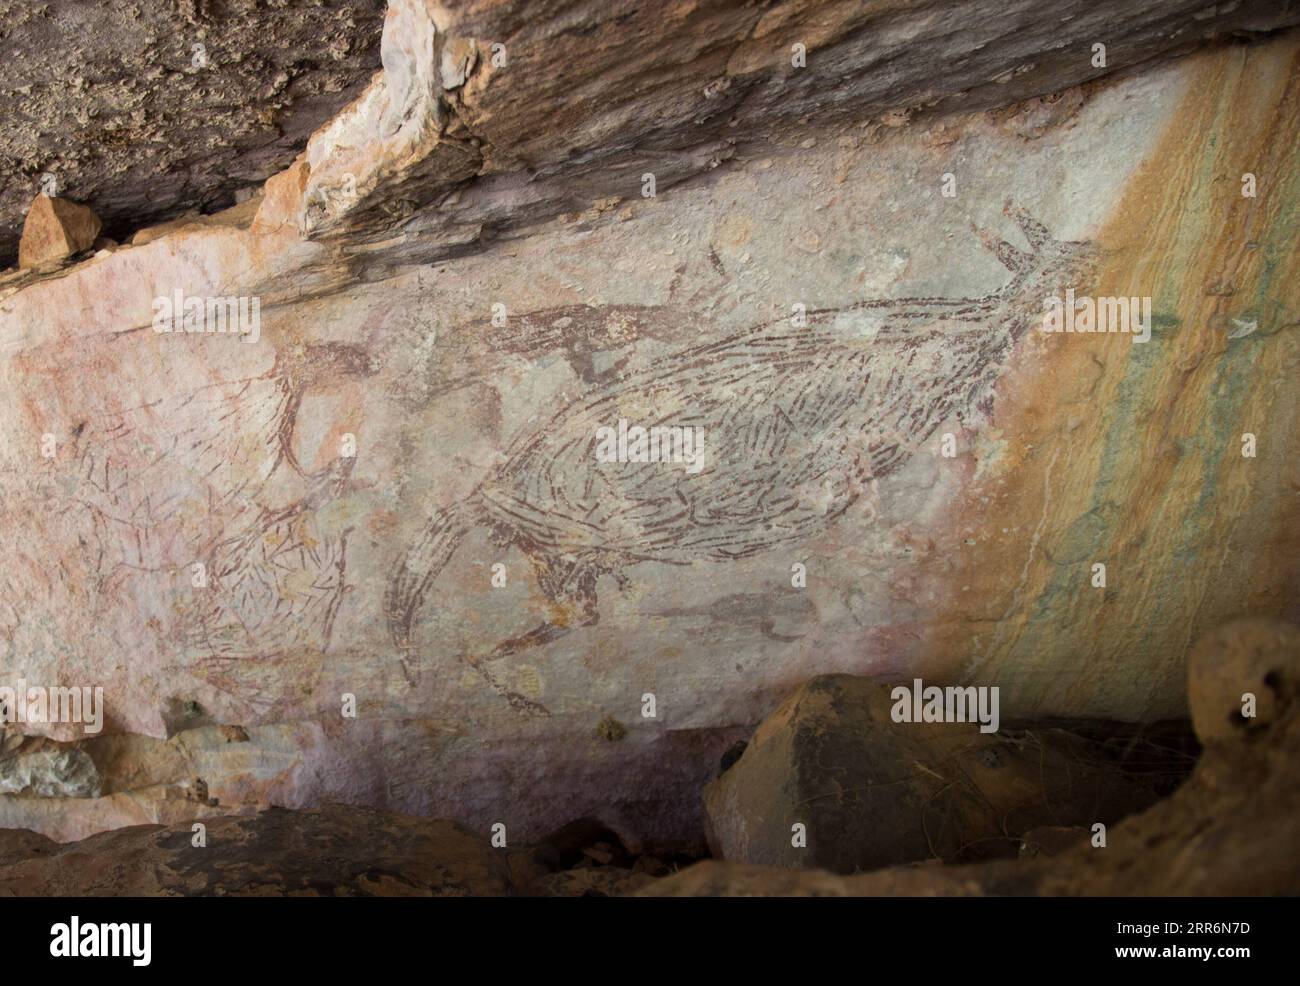 210223 -- SYDNEY, Feb. 23, 2021 -- File photo taken on July 15, 2016 shows a painting of a kangaroo in Kimberley region, Australia. A two-meter-long painting of a kangaroo in Western Australia s Kimberley region has been recognized as Australia s oldest intact rock painting, dating back 17,300 years. Naturalistic depictions of animals are a common subject for the world s oldest dated rock art. In a paper published in Nature Human Behavior on Tuesday, a research team led by the University of Melbourne used the radiocarbon dating of 27 mud wasp nests from 16 similar paintings in Kimberley to ide Stock Photo